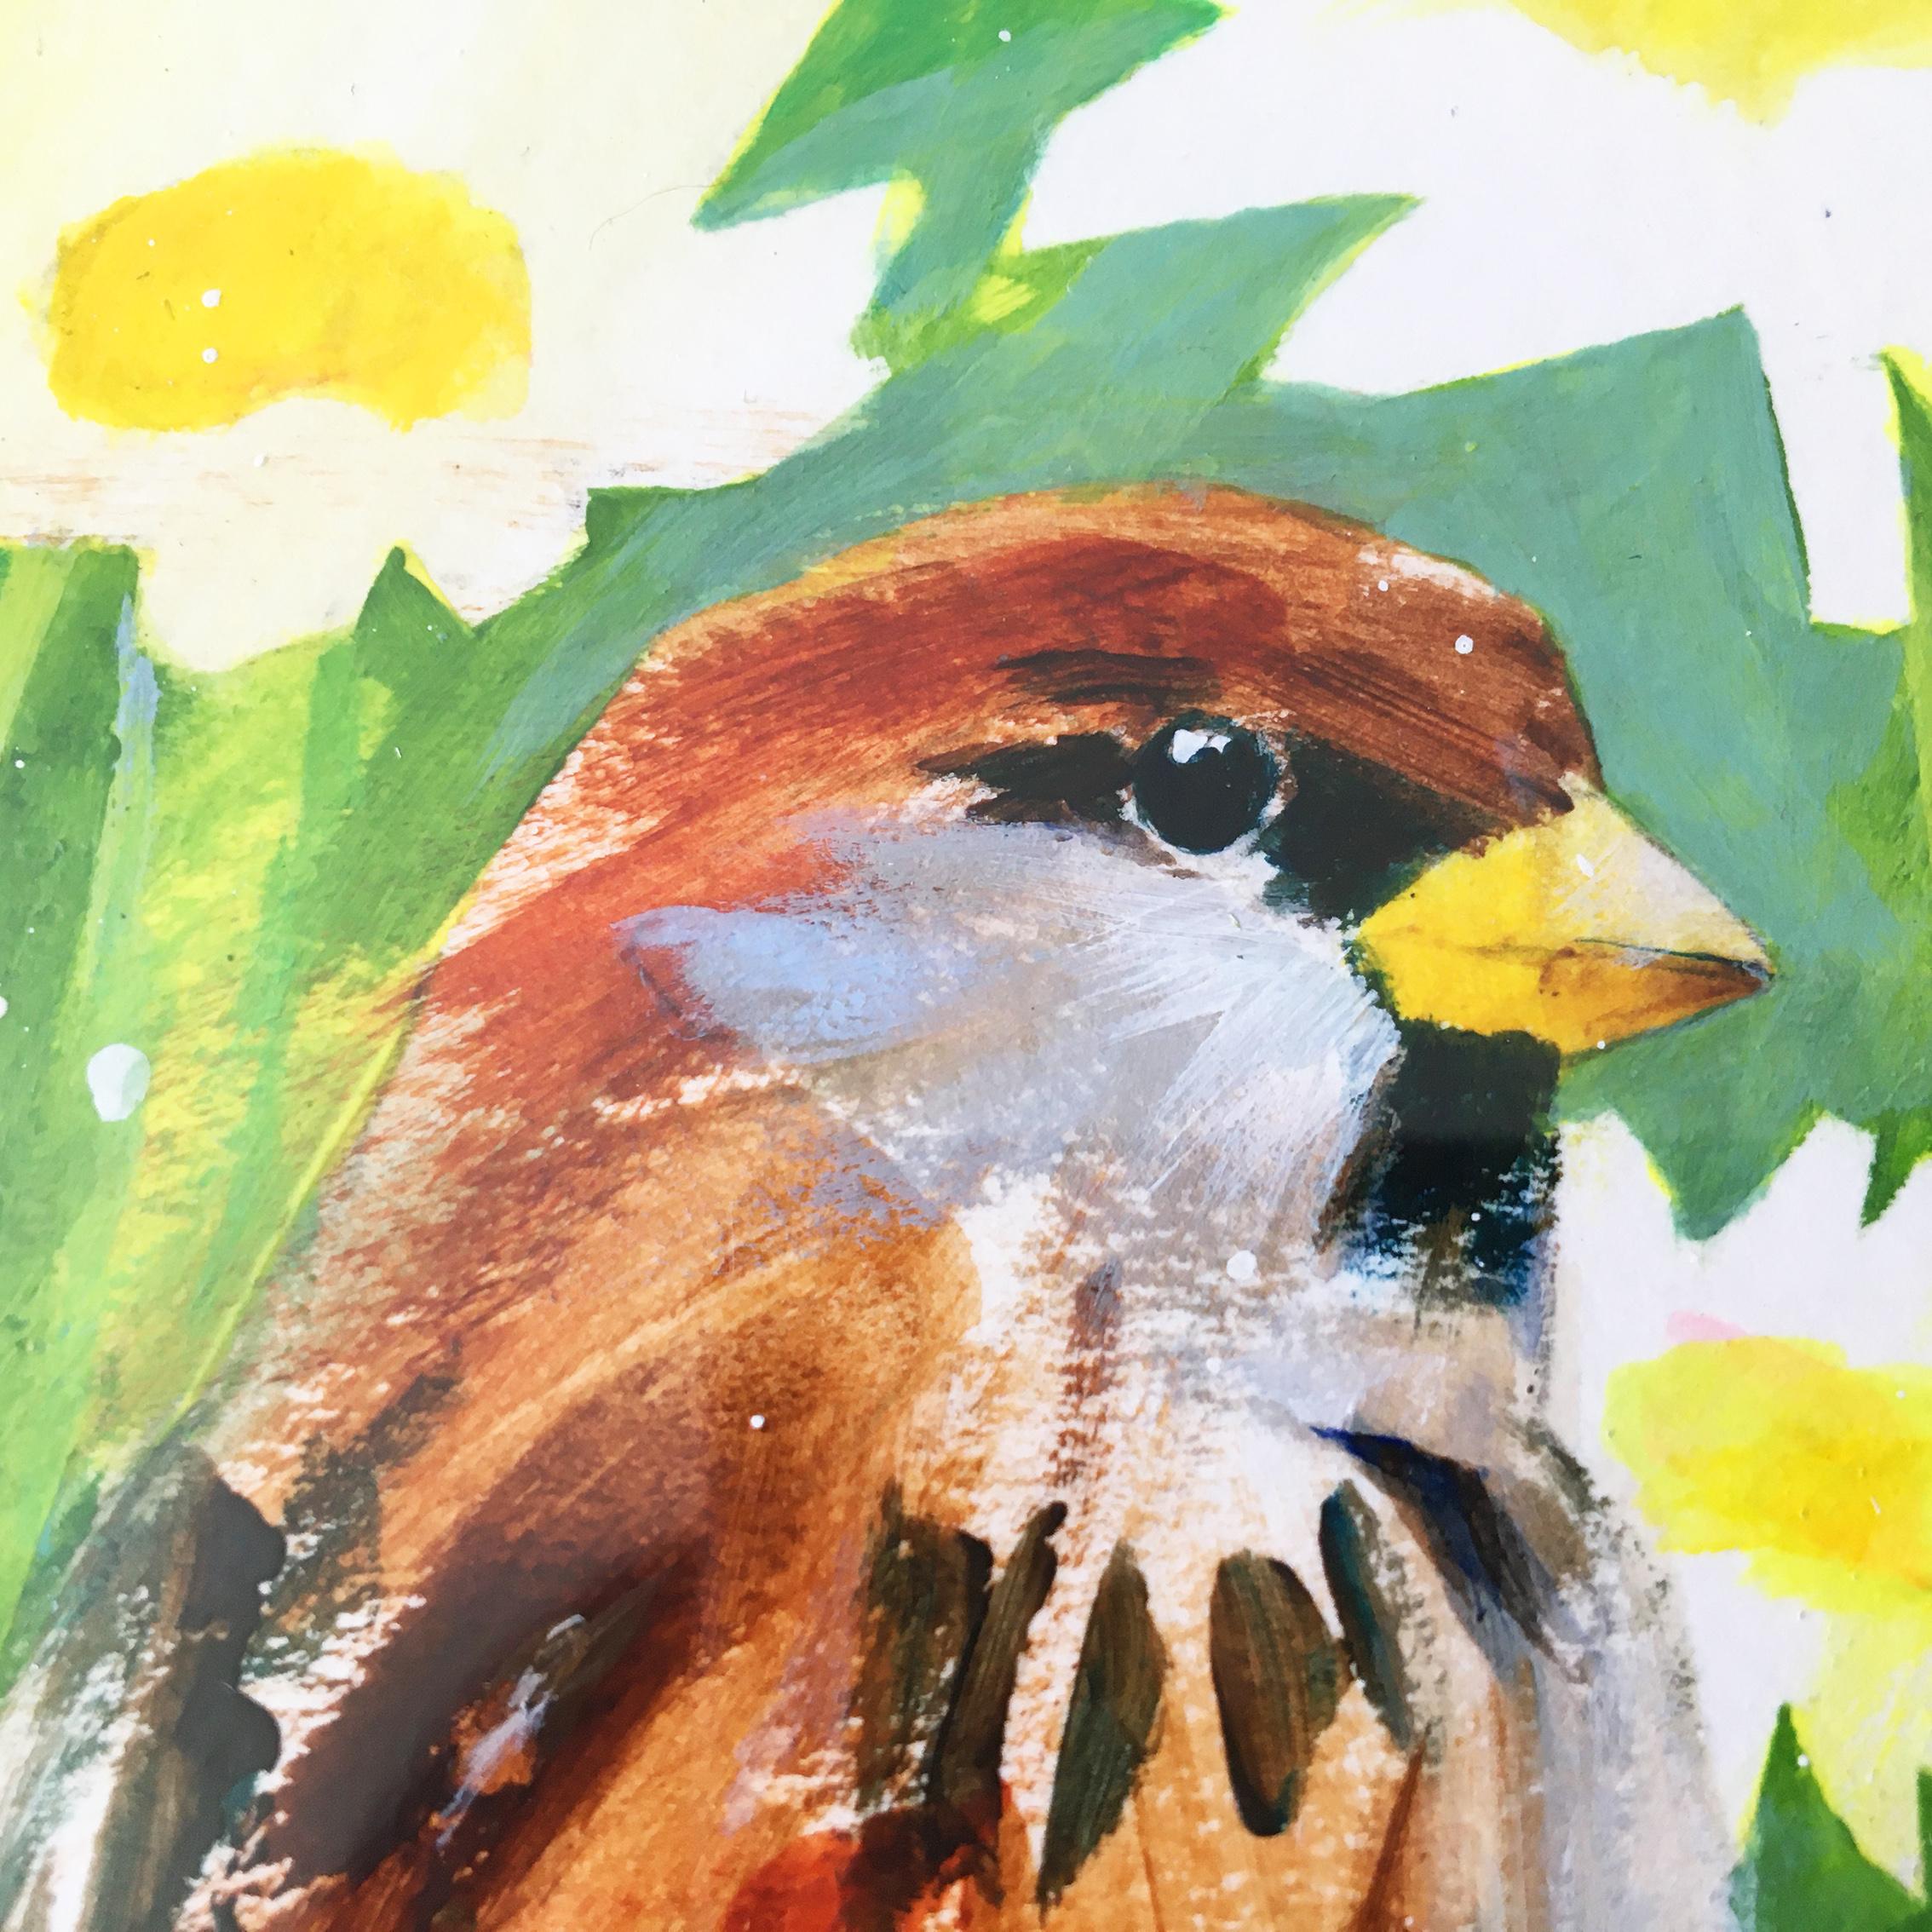 Summer Sparrow by Carolyn Carter [2019]

original
Acrylic on Board
Image size: H:21 cm x W:21 cm
Complete Size of Unframed Work: H:N/A cm x W:N/A cm x D:N/Acm
Frame Size: H:35 cm x W:35 cm x D:3.5cm
Sold Framed
Please note that insitu images are